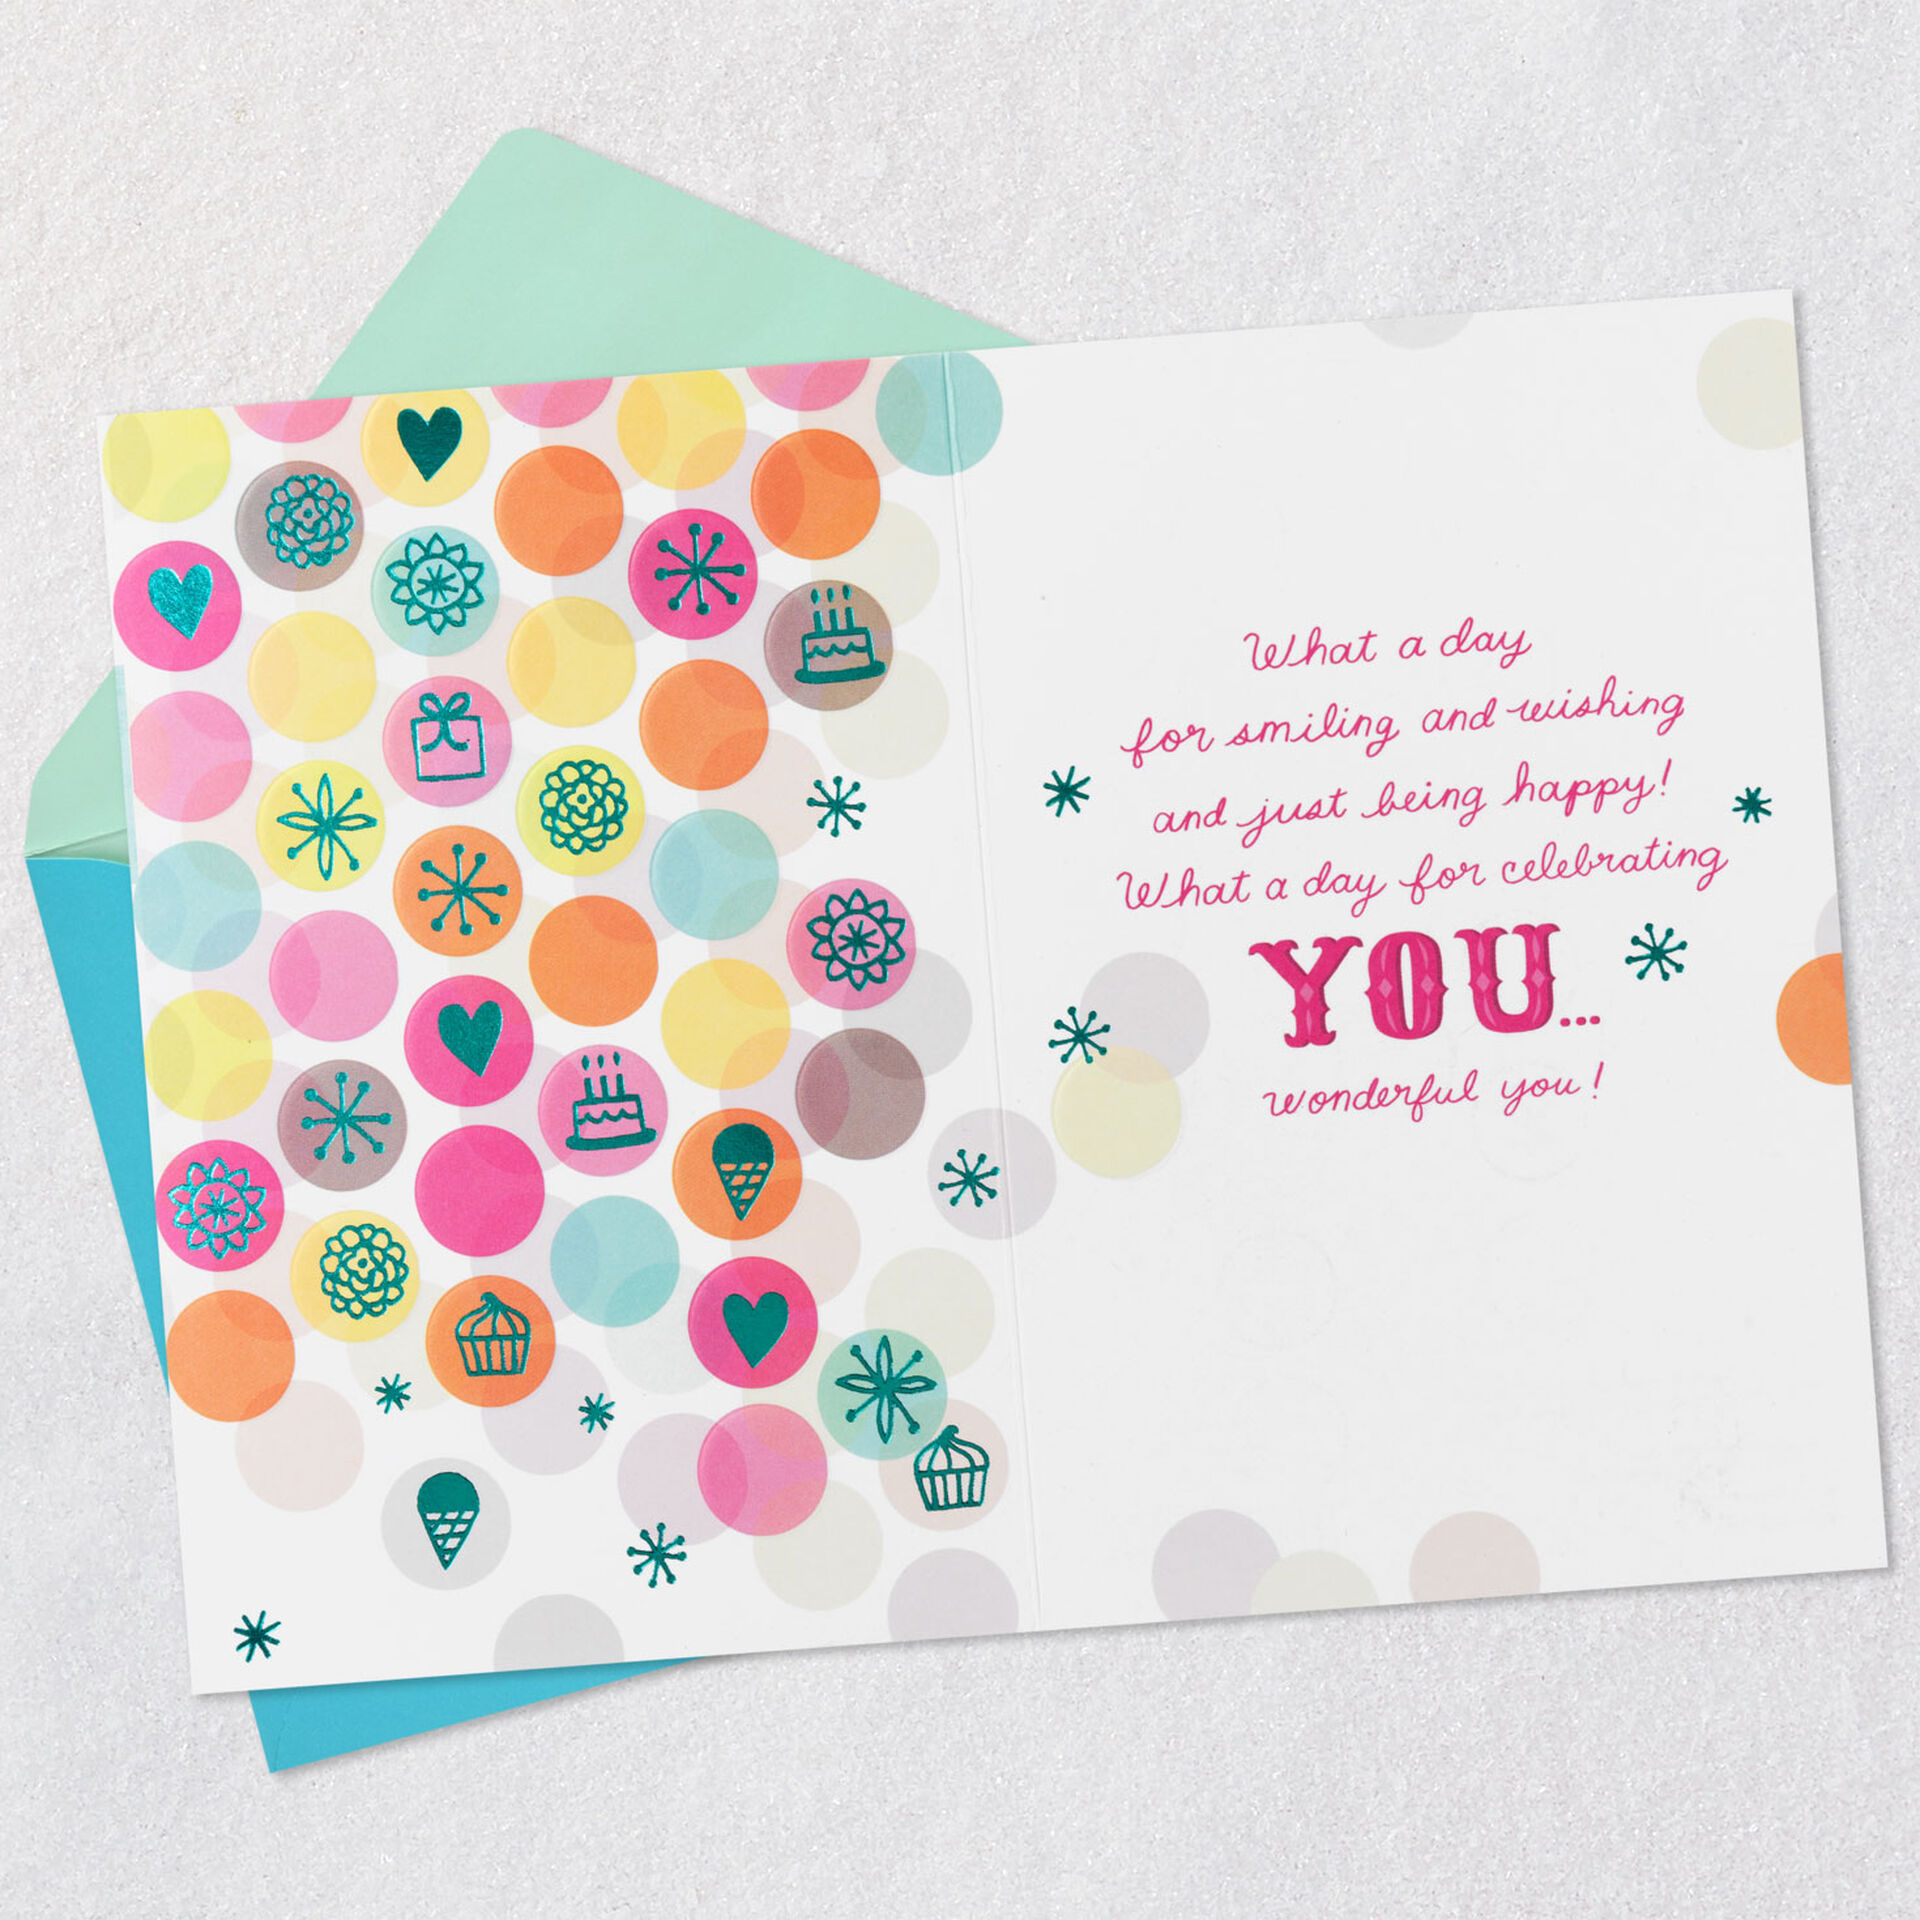 Polka-Dots-and-Doodles-Birthday-Card-for-Niece_499FBD9374_03